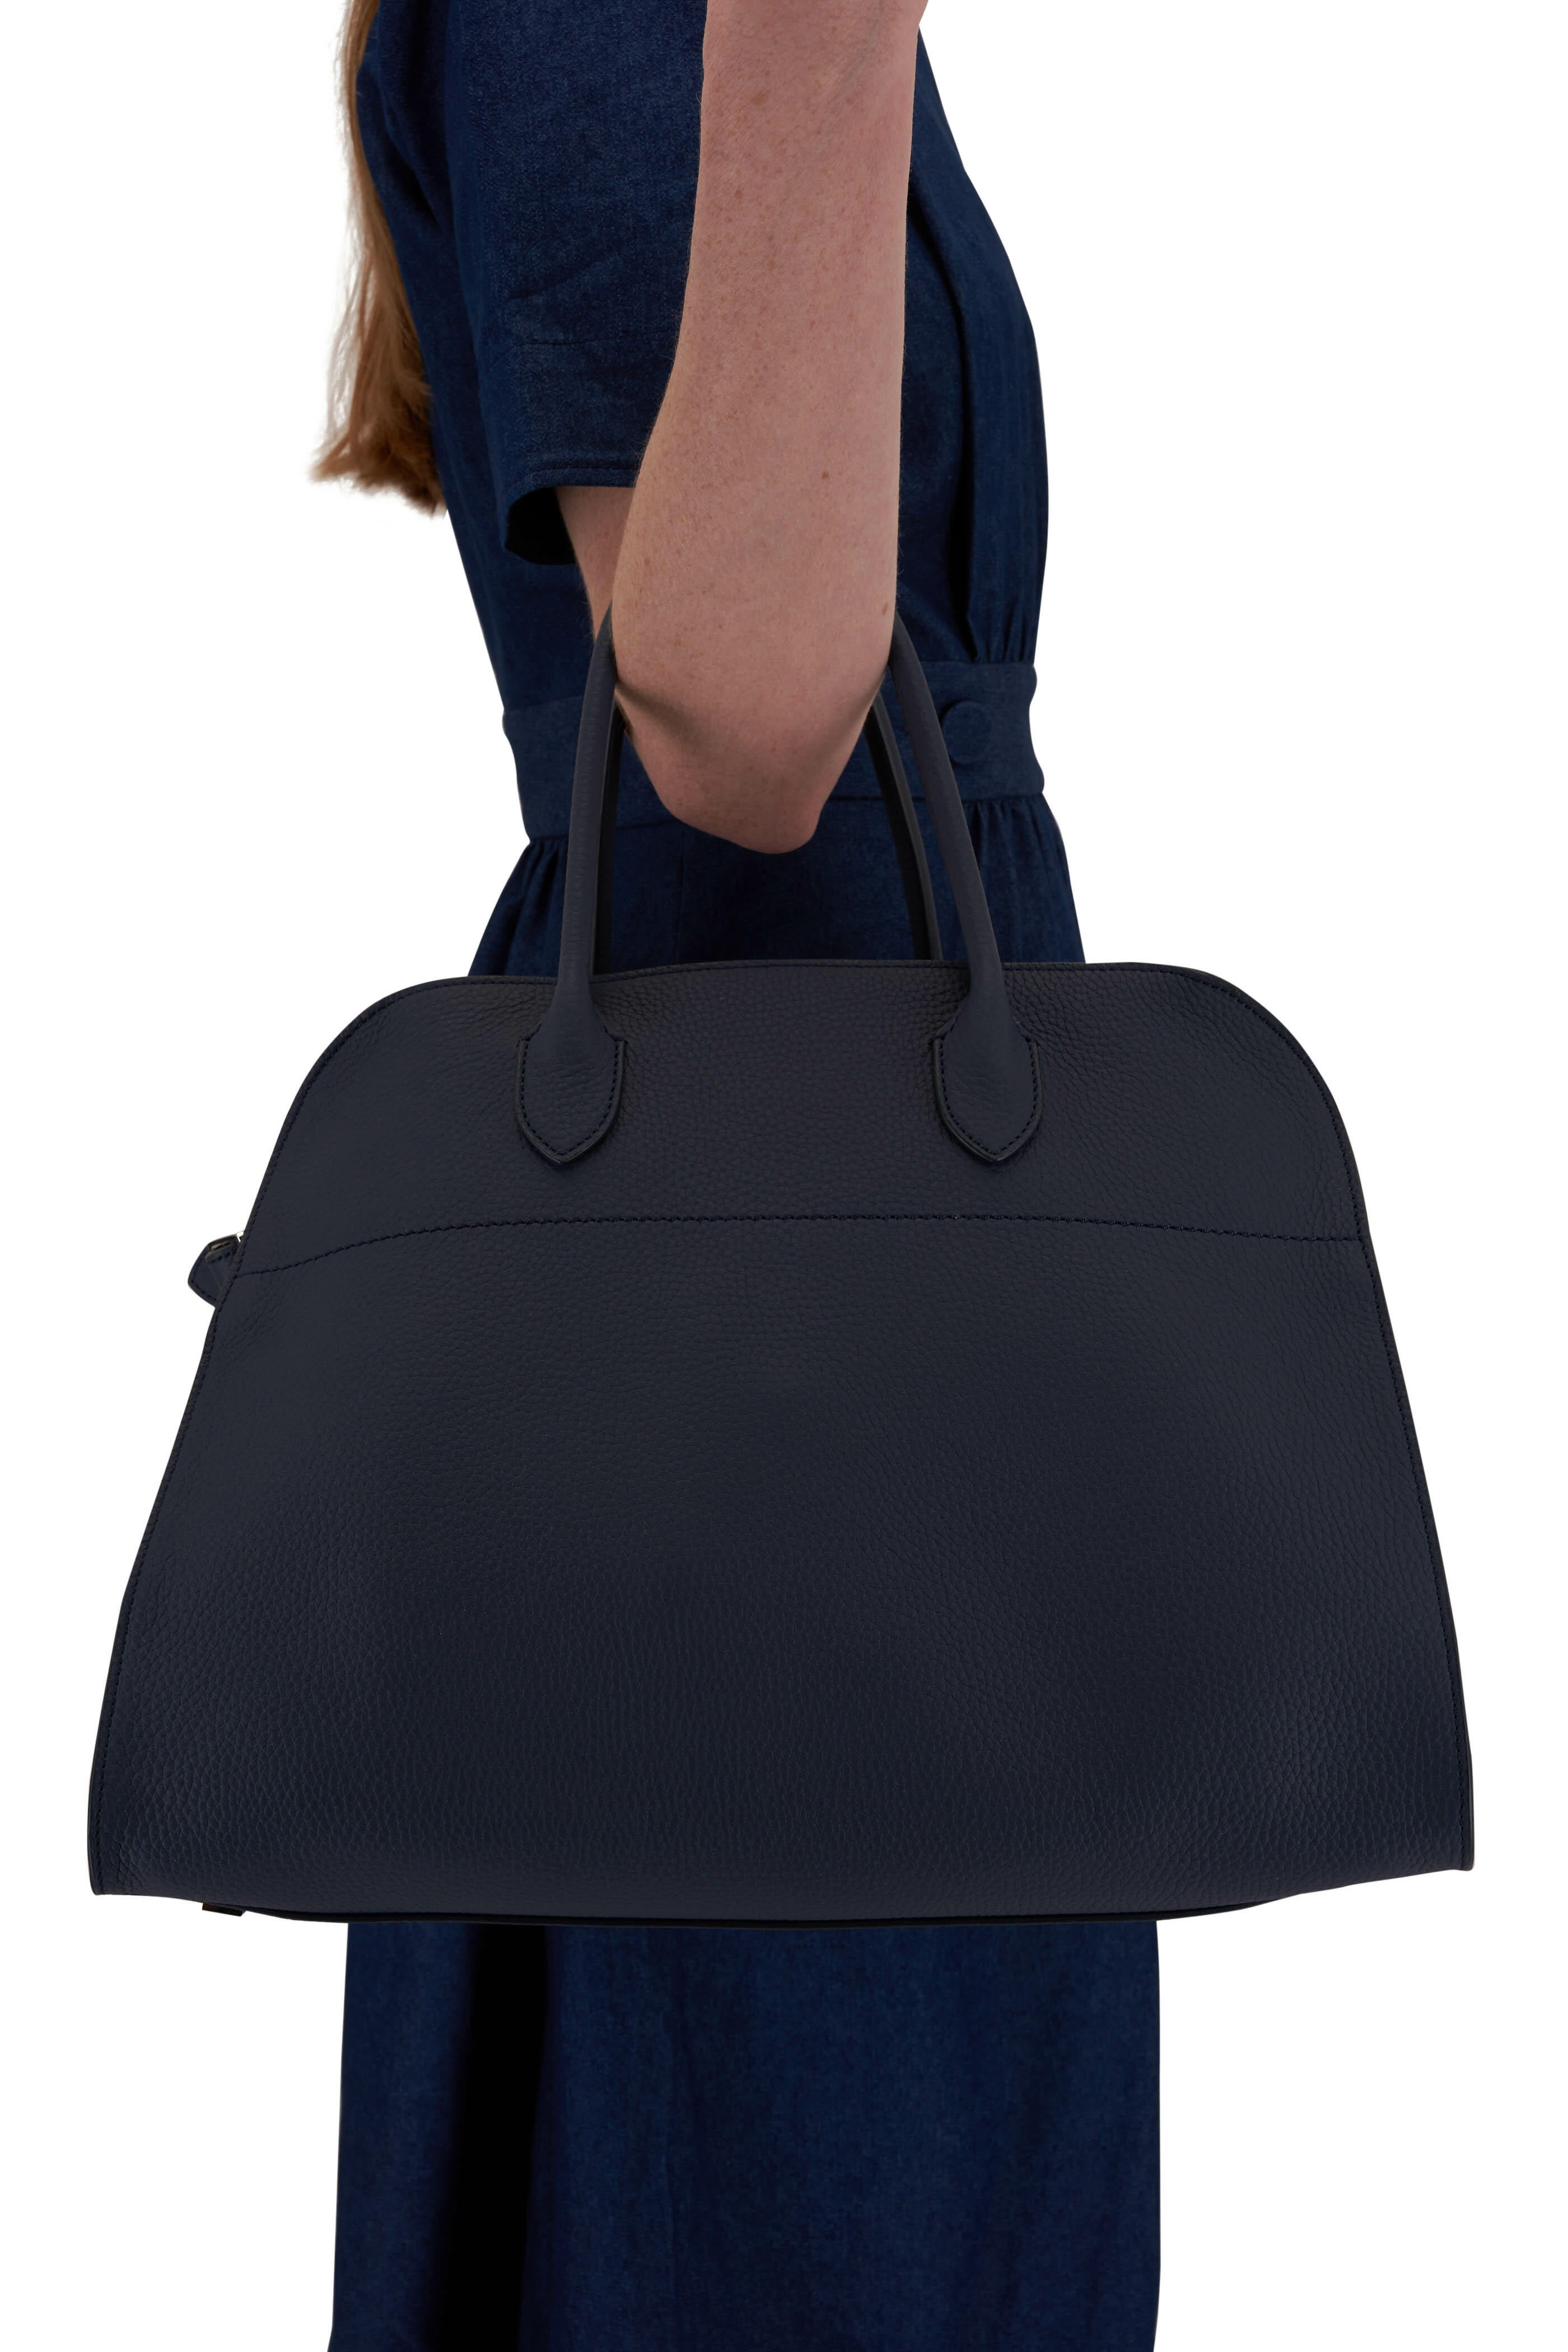 The Row Margaux 15 Top-Handle Bag